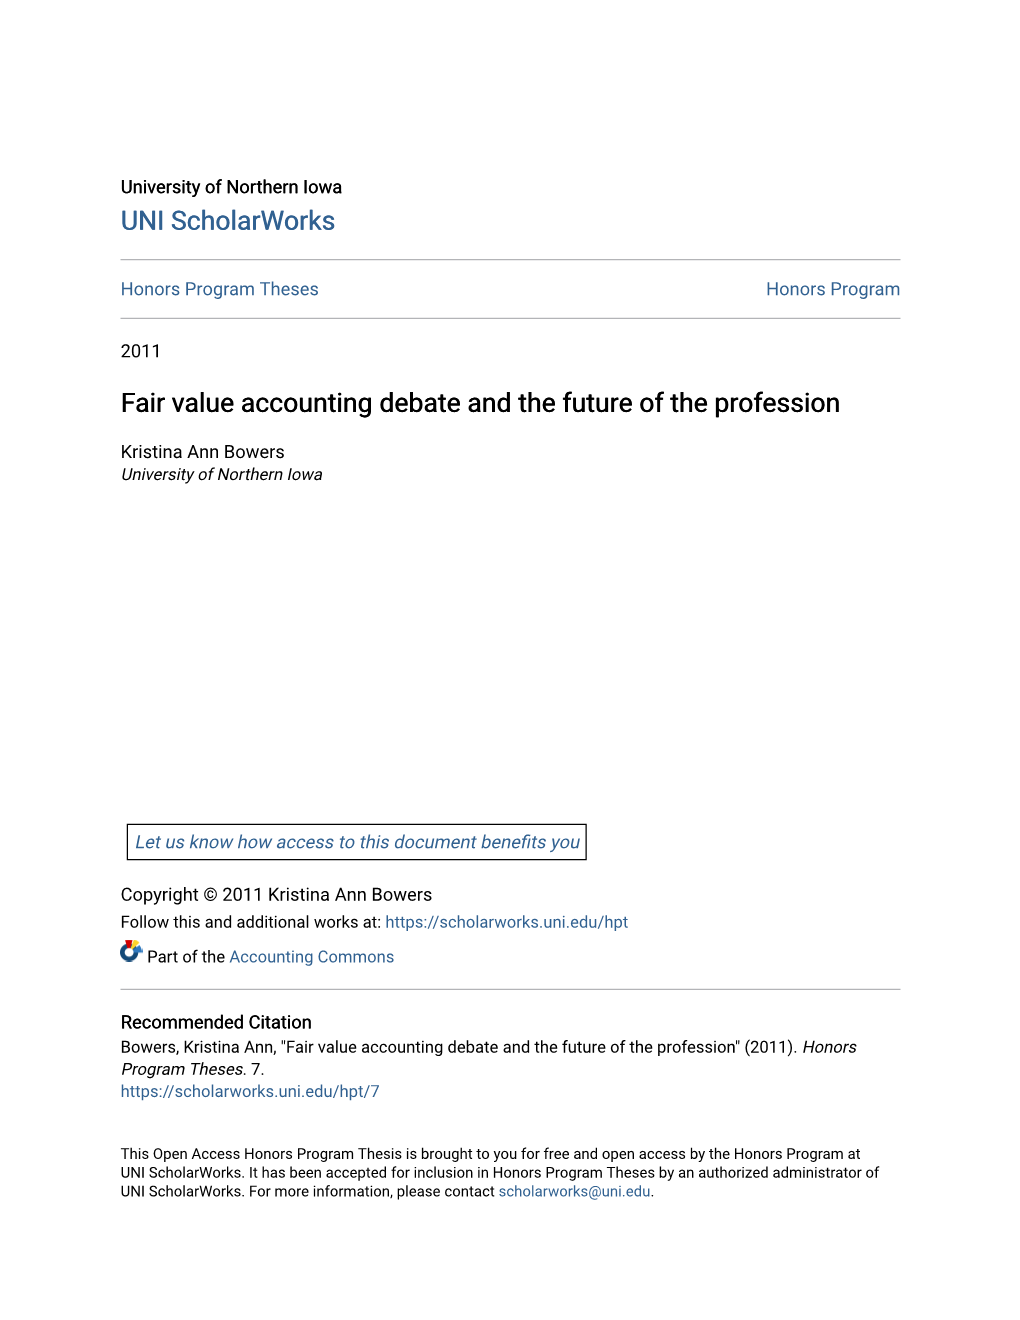 Fair Value Accounting Debate and the Future of the Profession